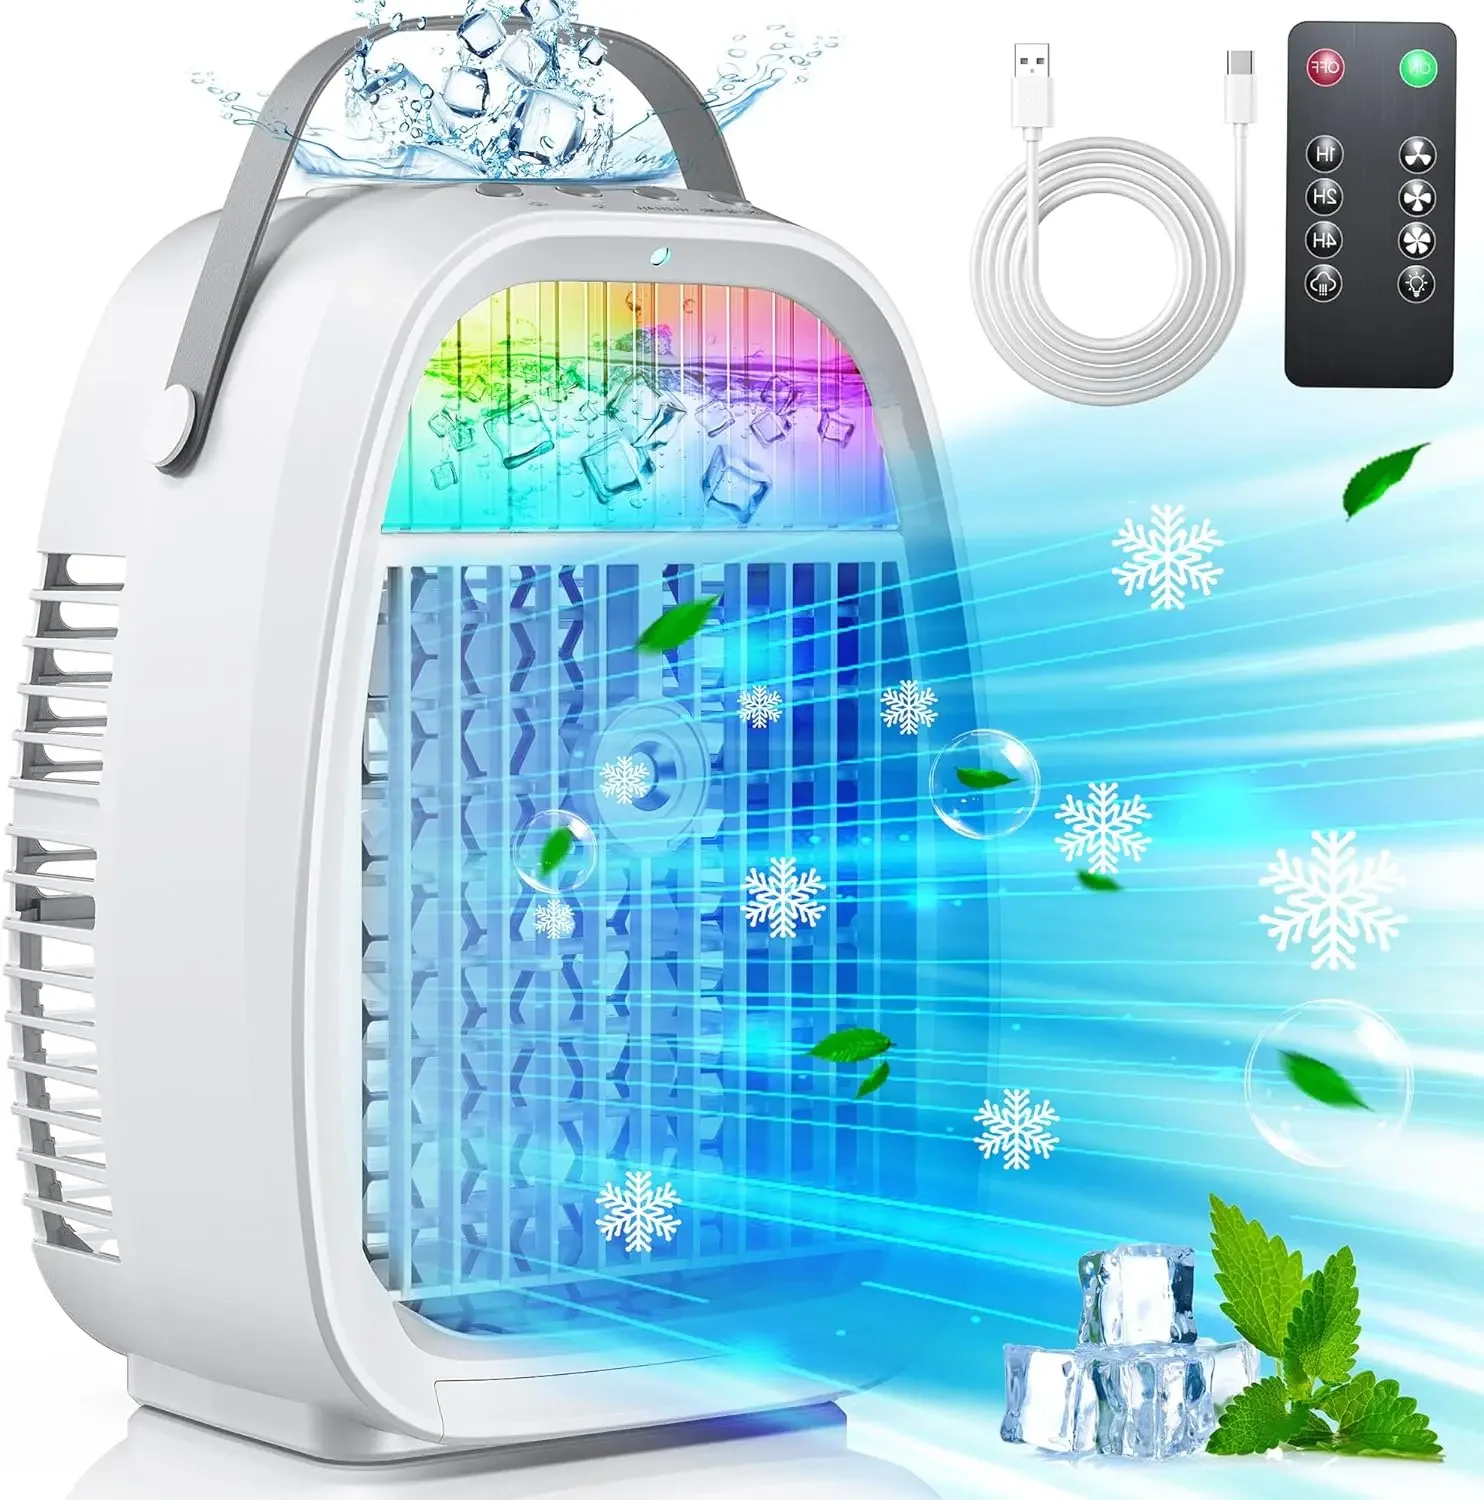 

Efficient AI Evaporative Mini Air Conditioner Fan with AC Air Cooler, 4-in-1 Humidifier, and 7 Colors Light - Perfect for Coolin